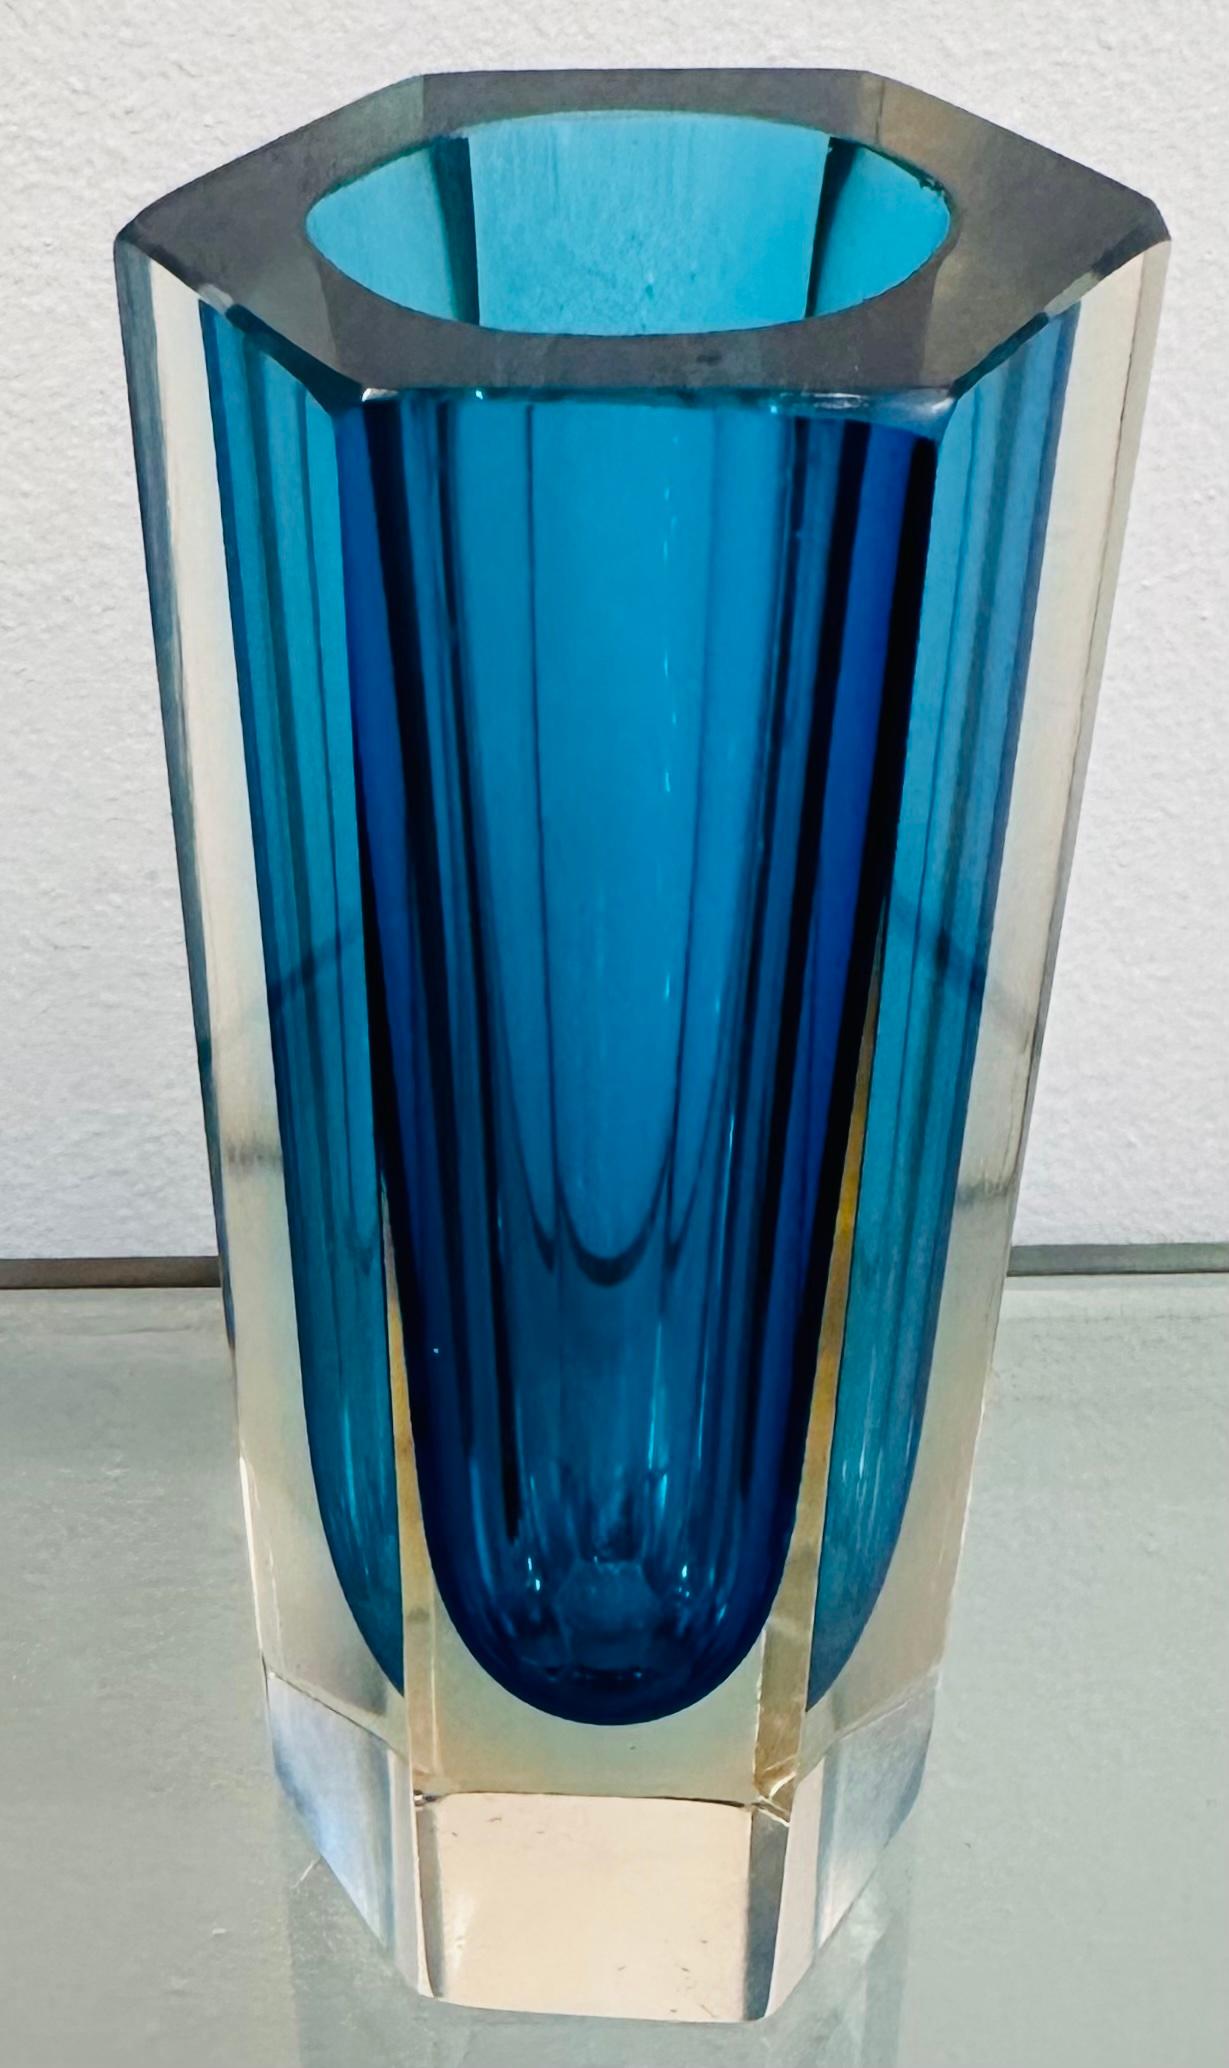 A small Italian Murano hexagonal turquoise encased in clear glass vase. A beautiful decorative piece perfect for a glass display case or shelf where the light can shine through it to emphasise the beautiful coloured glass. The vase is in very good